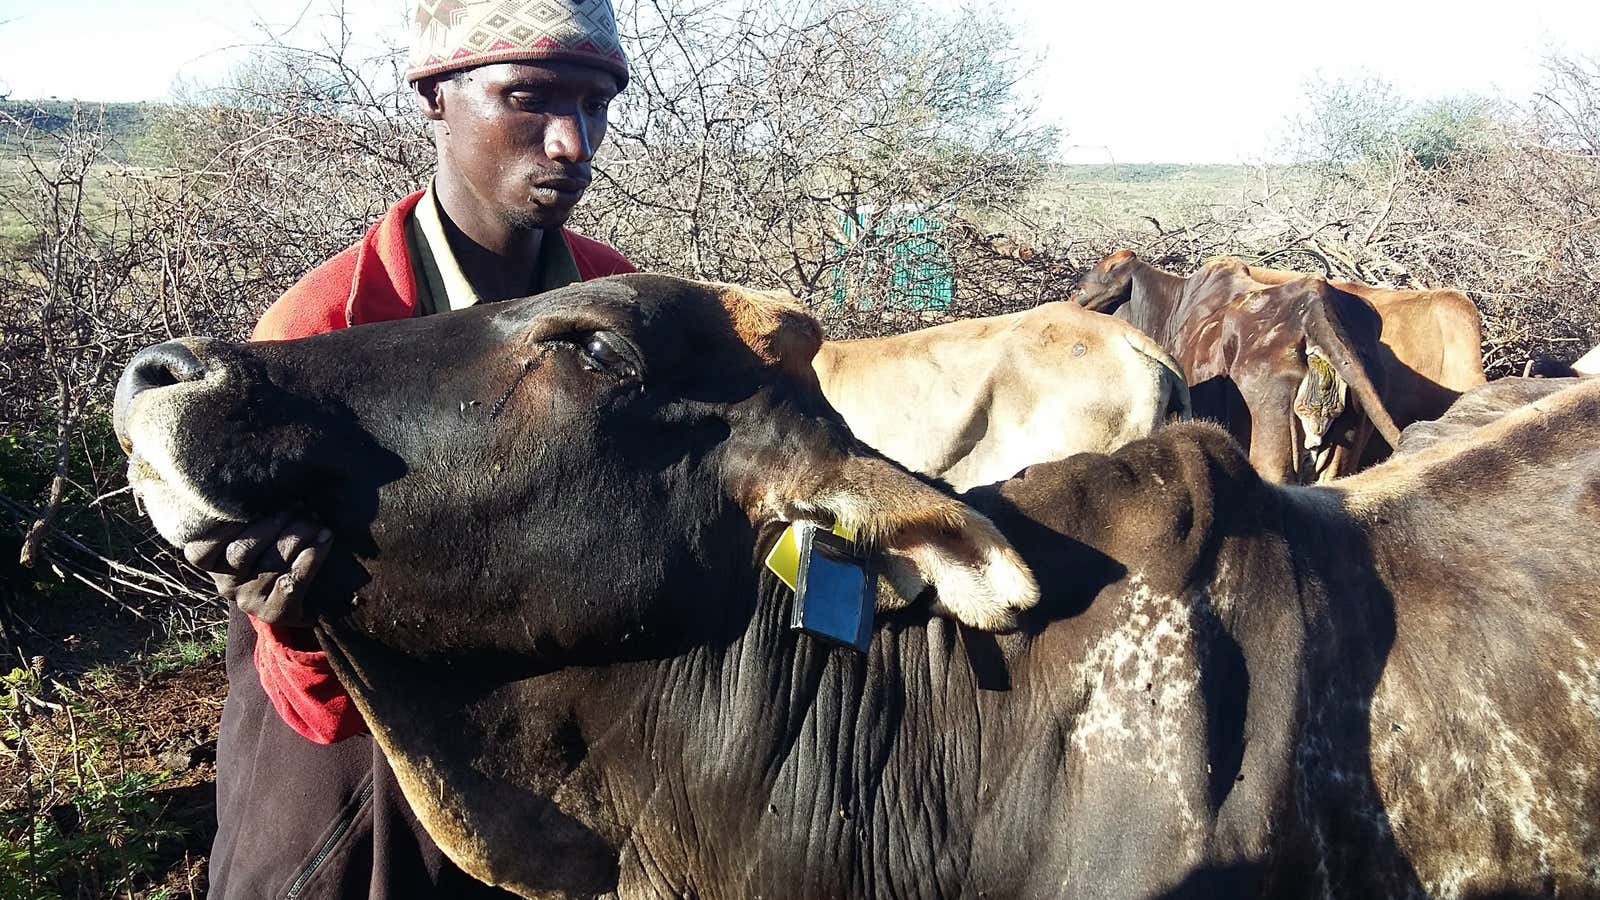 A chipped cow in Kenya